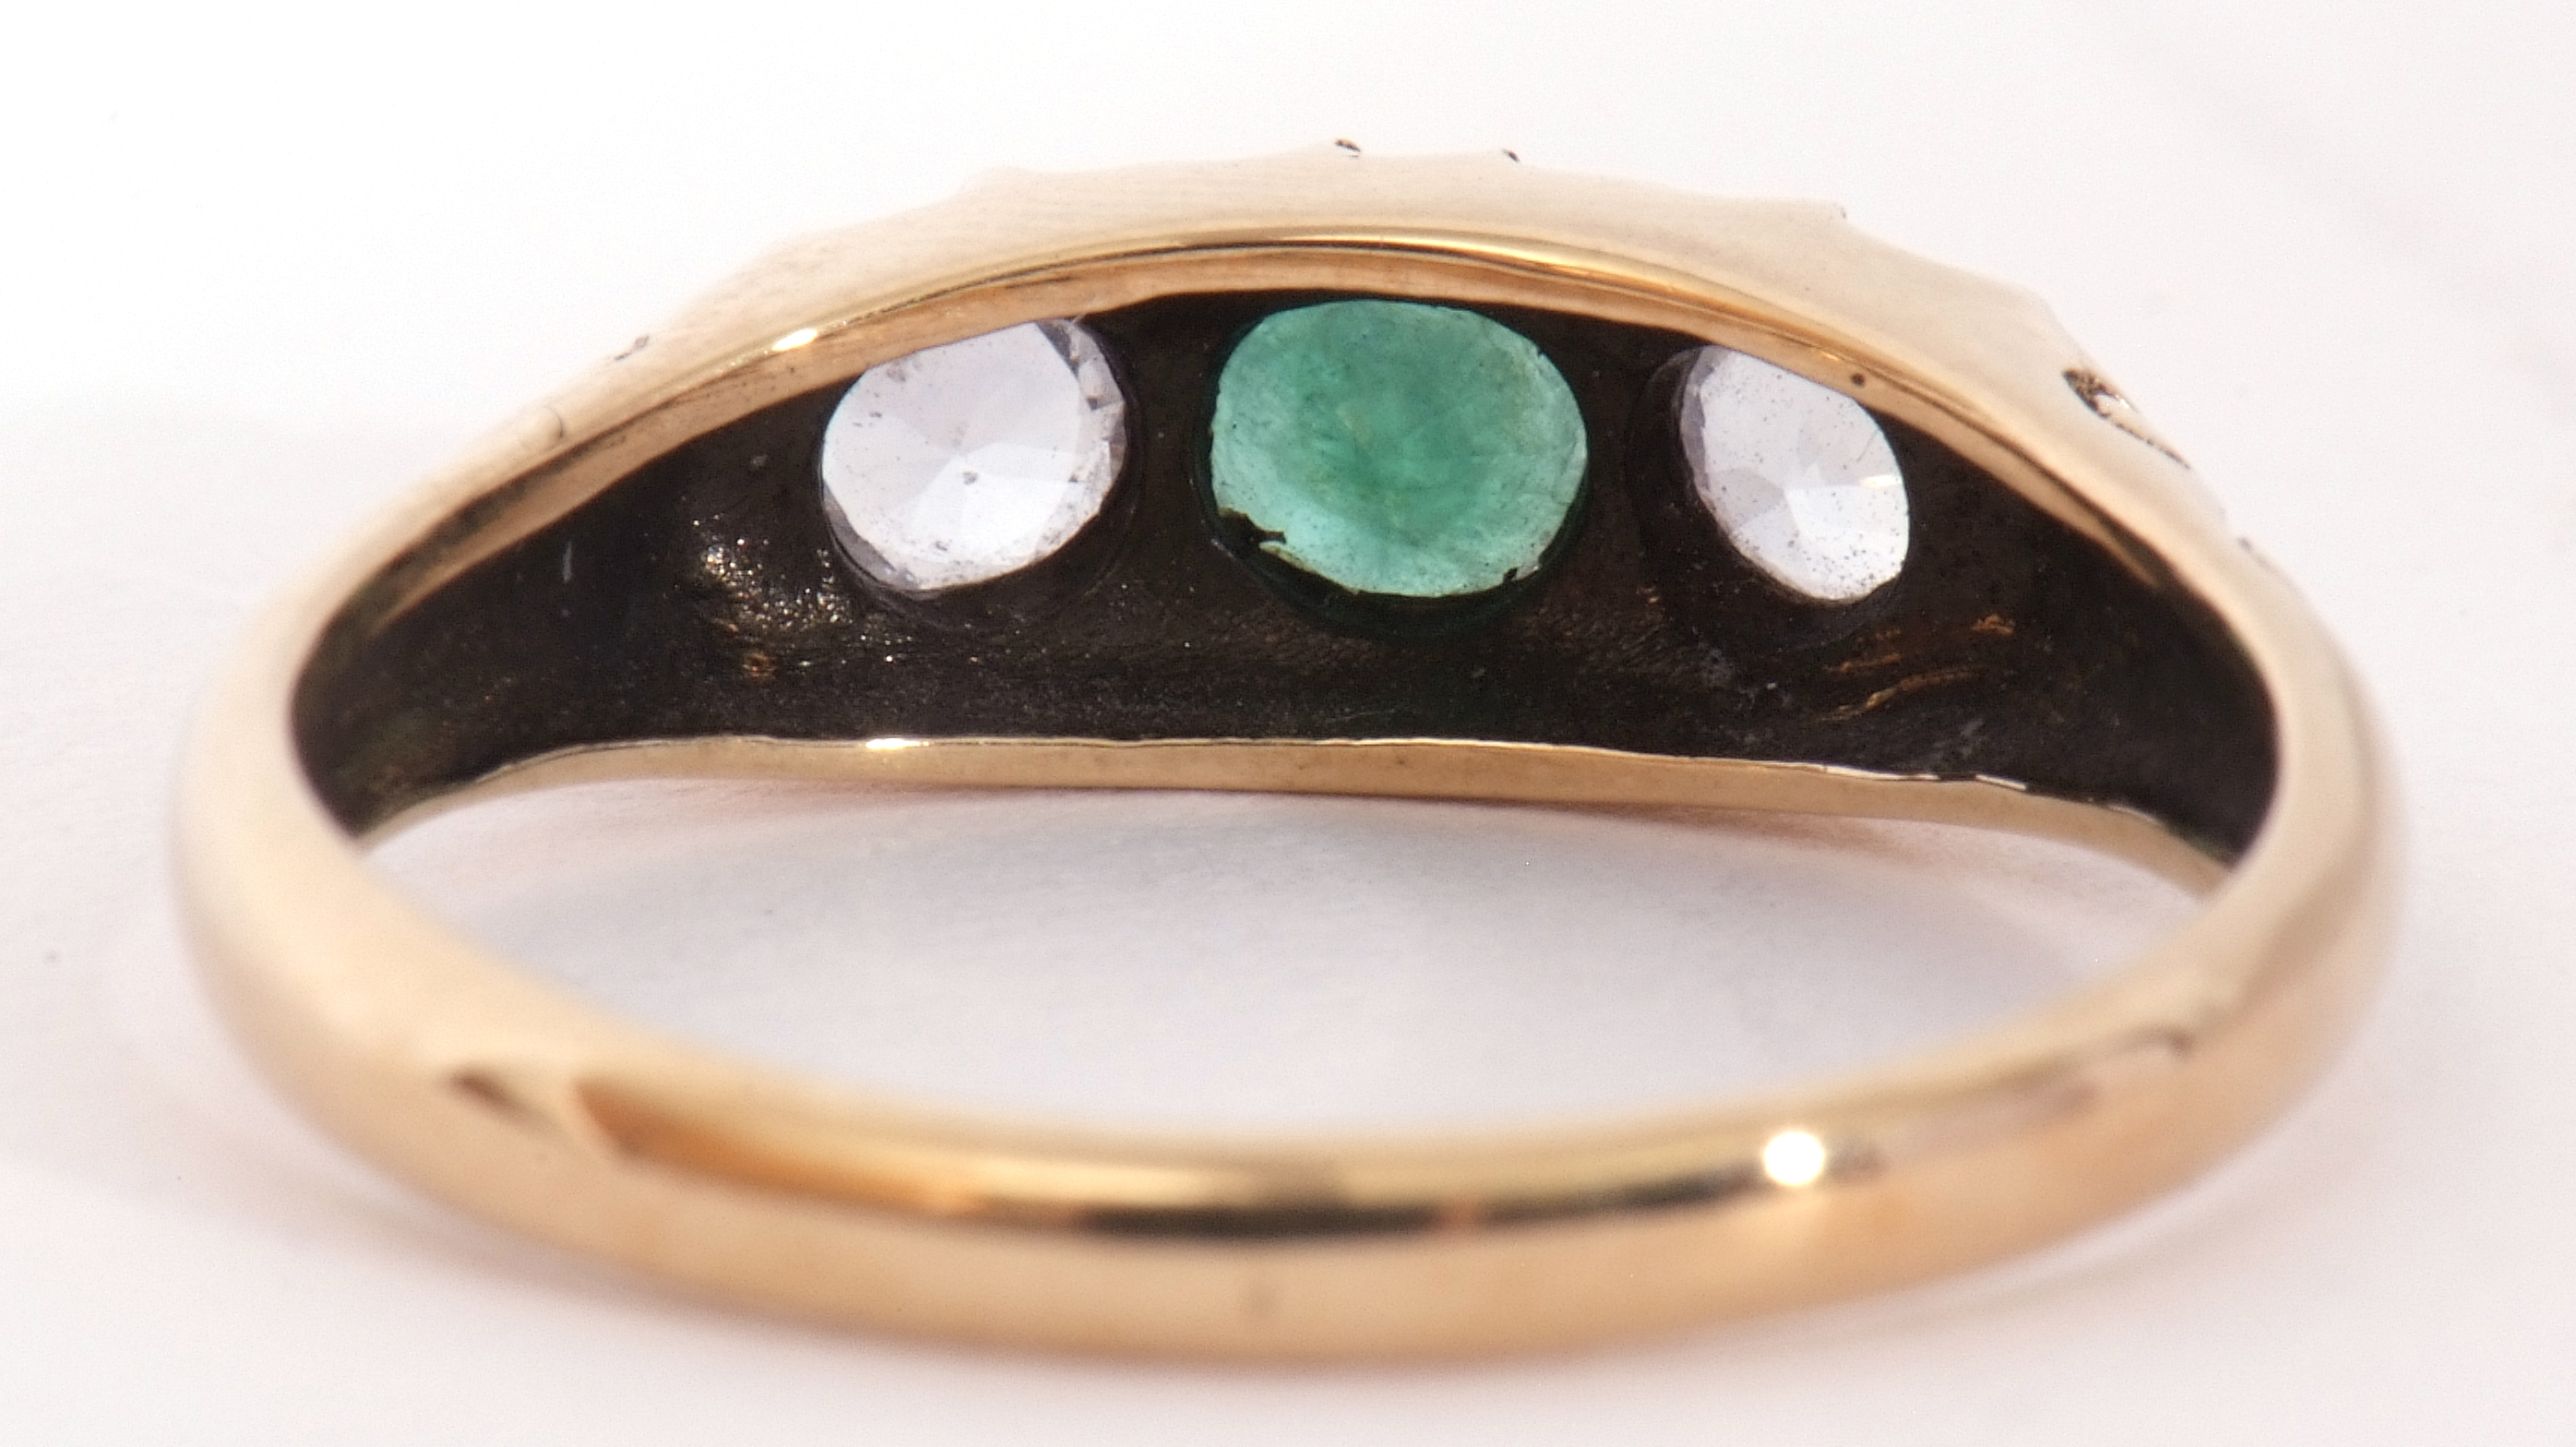 Modern 9ct gold paste set ring centring a green coloured stone between two pastes - Image 3 of 10